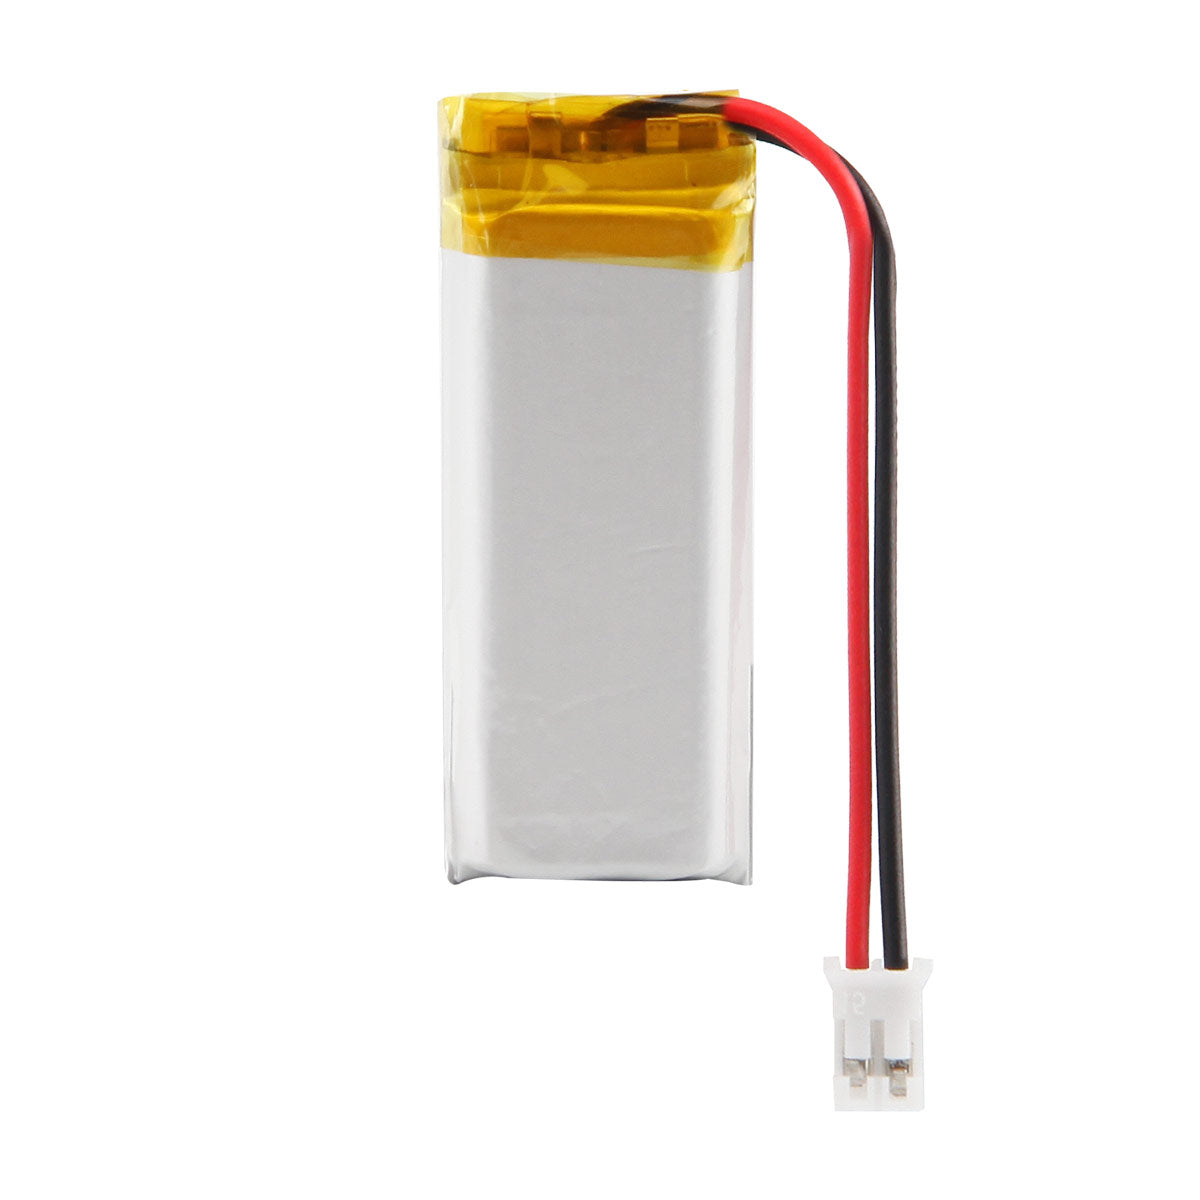 YDL 3.7V 720mAh 702248 Lithium Polymer Battery Rechargeable Lithium Polymer ion Battery Pack